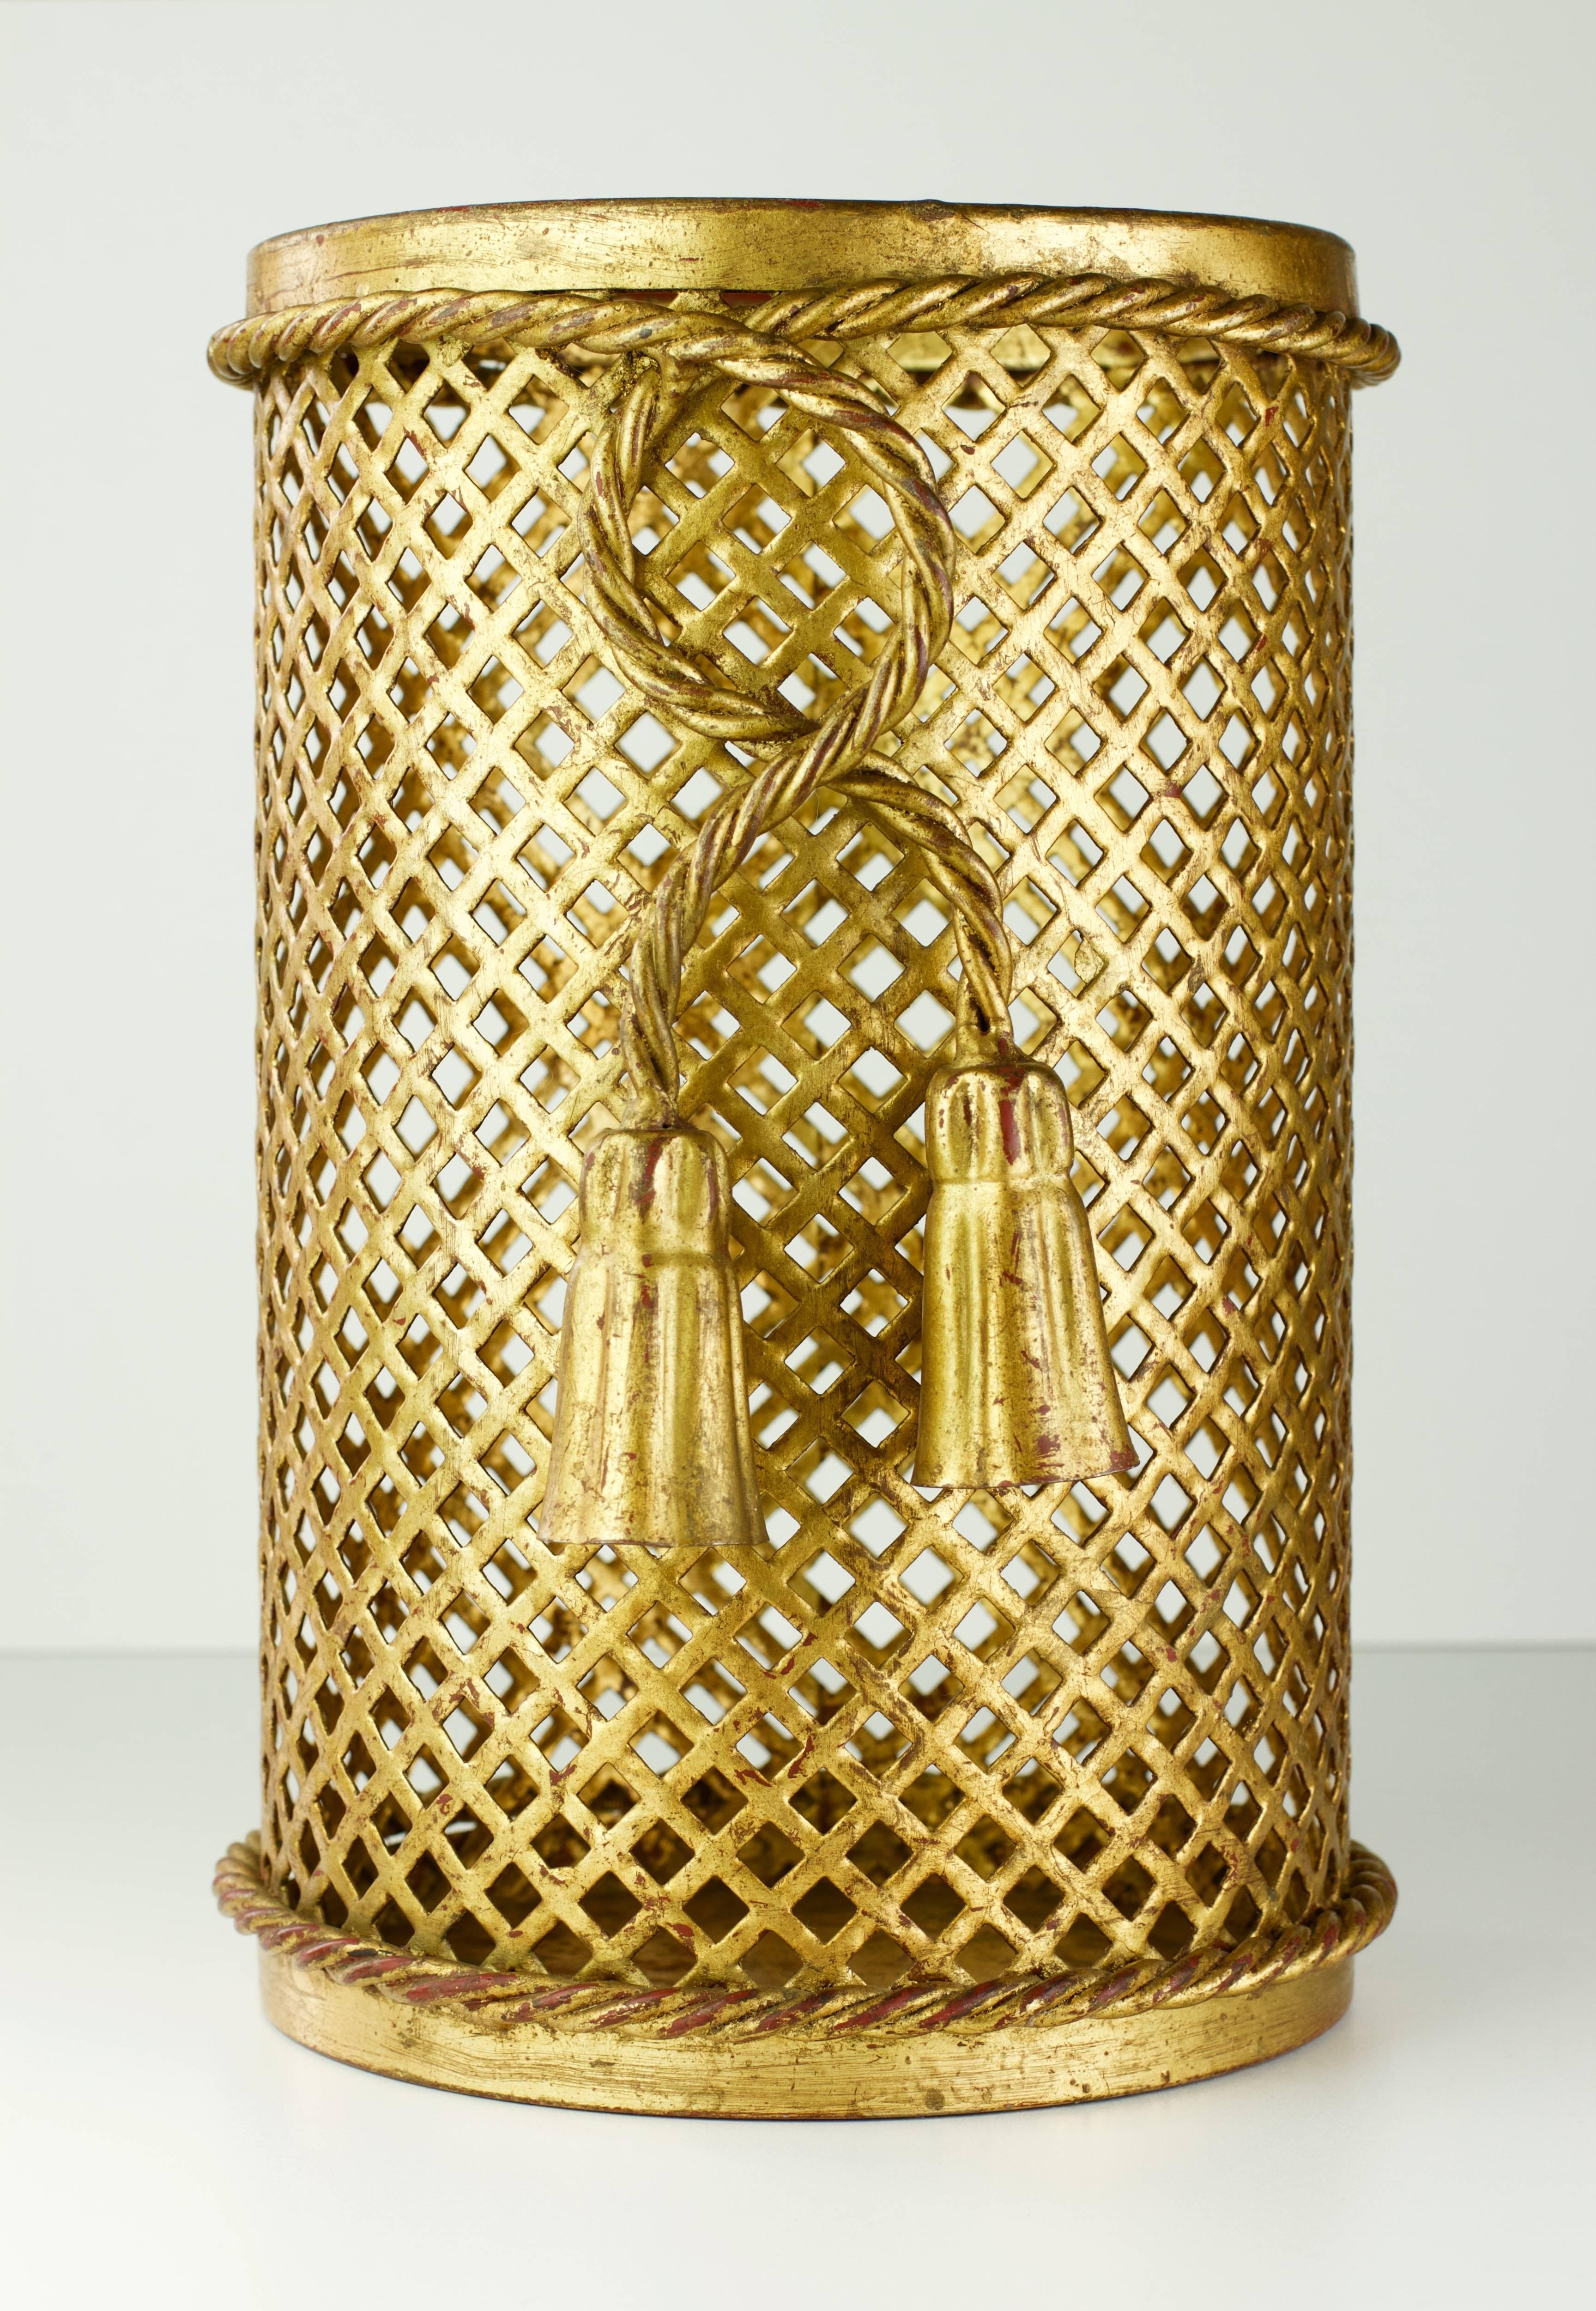 Stunning gold / gilt / gilded Hollywood Regency style trash can / bin / wastebasket made in Florence, Italy circa 1950 by Li Puma Firenze. The perforated lattice patterned metalwork with bent rope and tassel details finishes the piece perfectly.